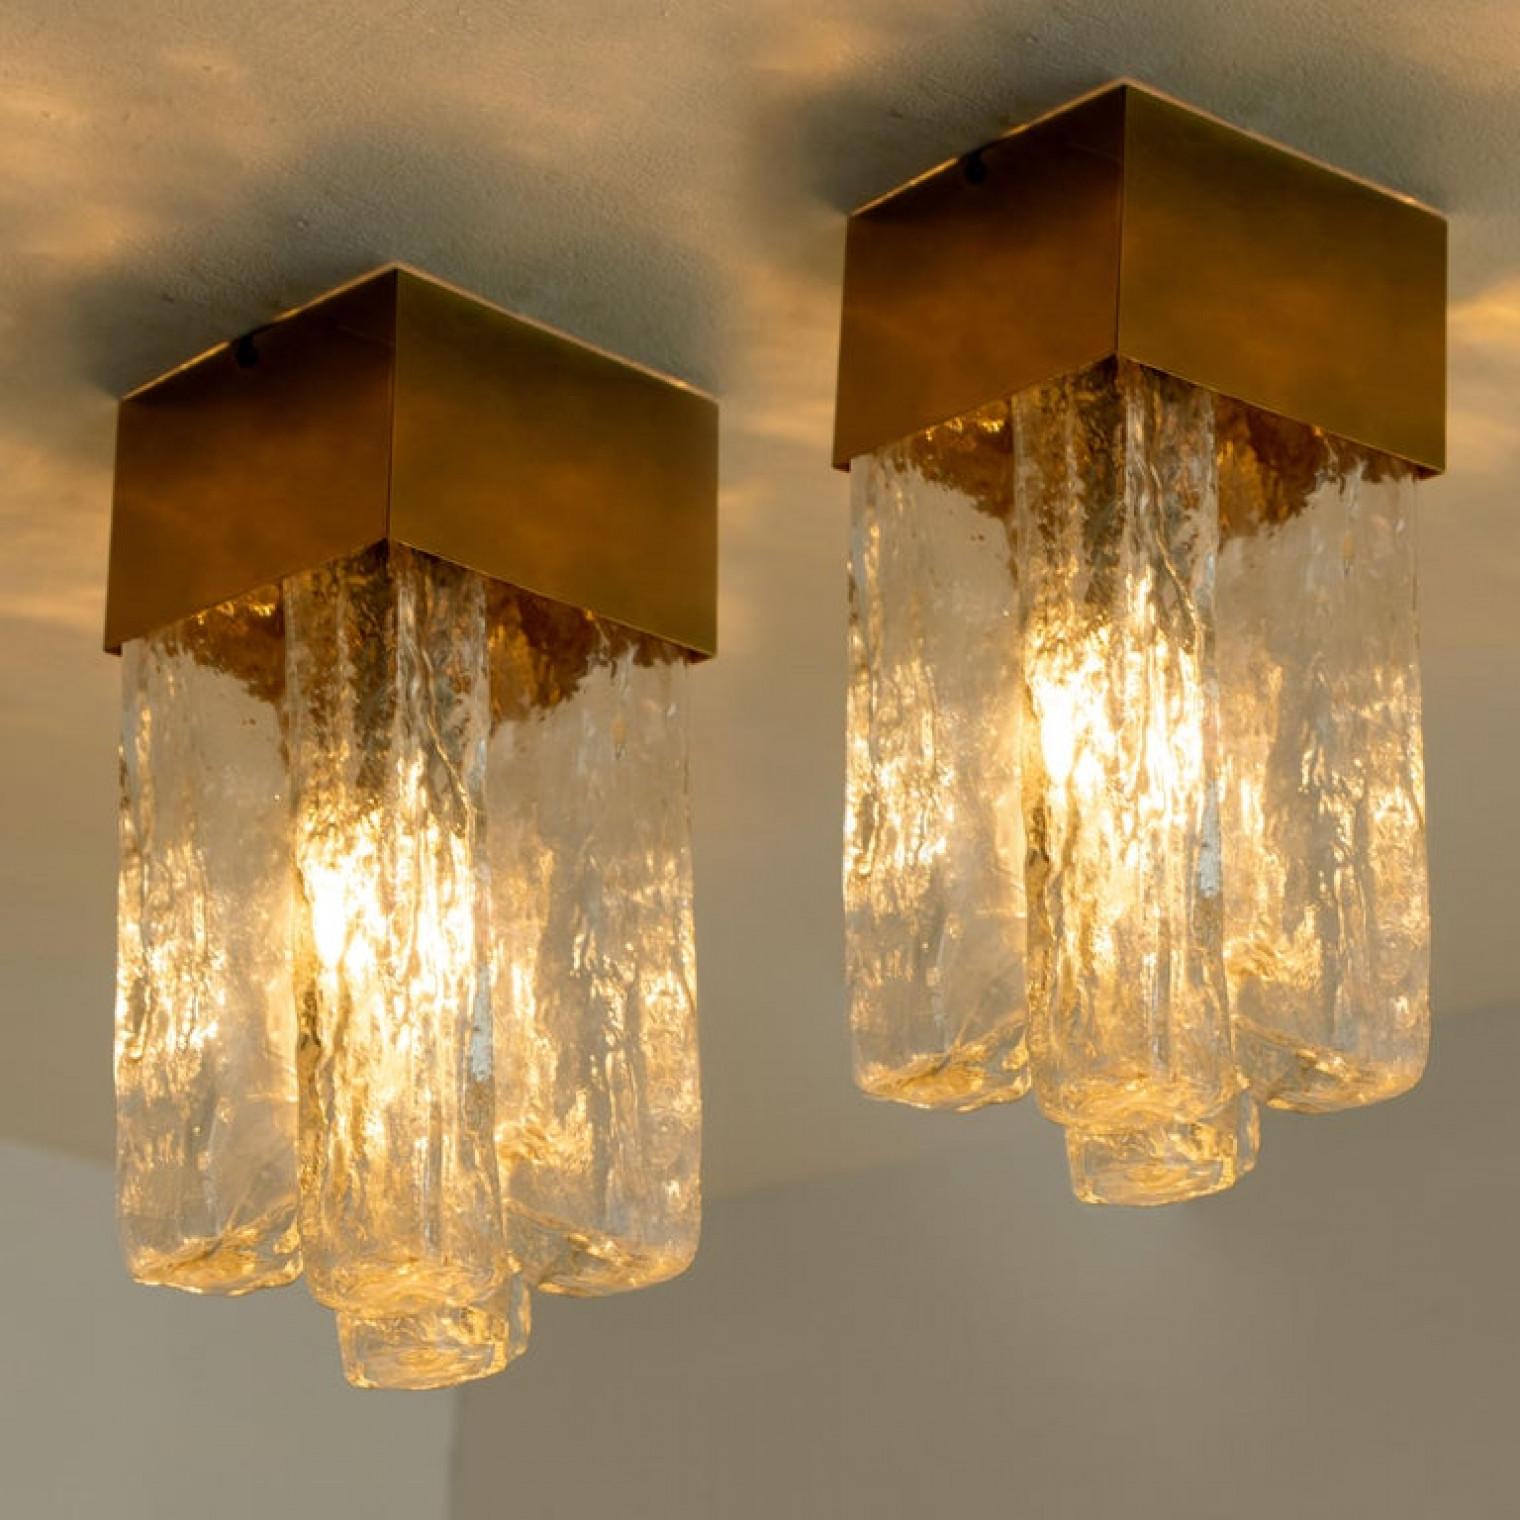 1 of the 10 flush lights with Brutalist ice glass on a brass frame, circa 1970s, by J.T. Kalmar. Cruciform design flush mount light with structured glass shade and a central brass square column. The crystals refract light beautifully and are perfect